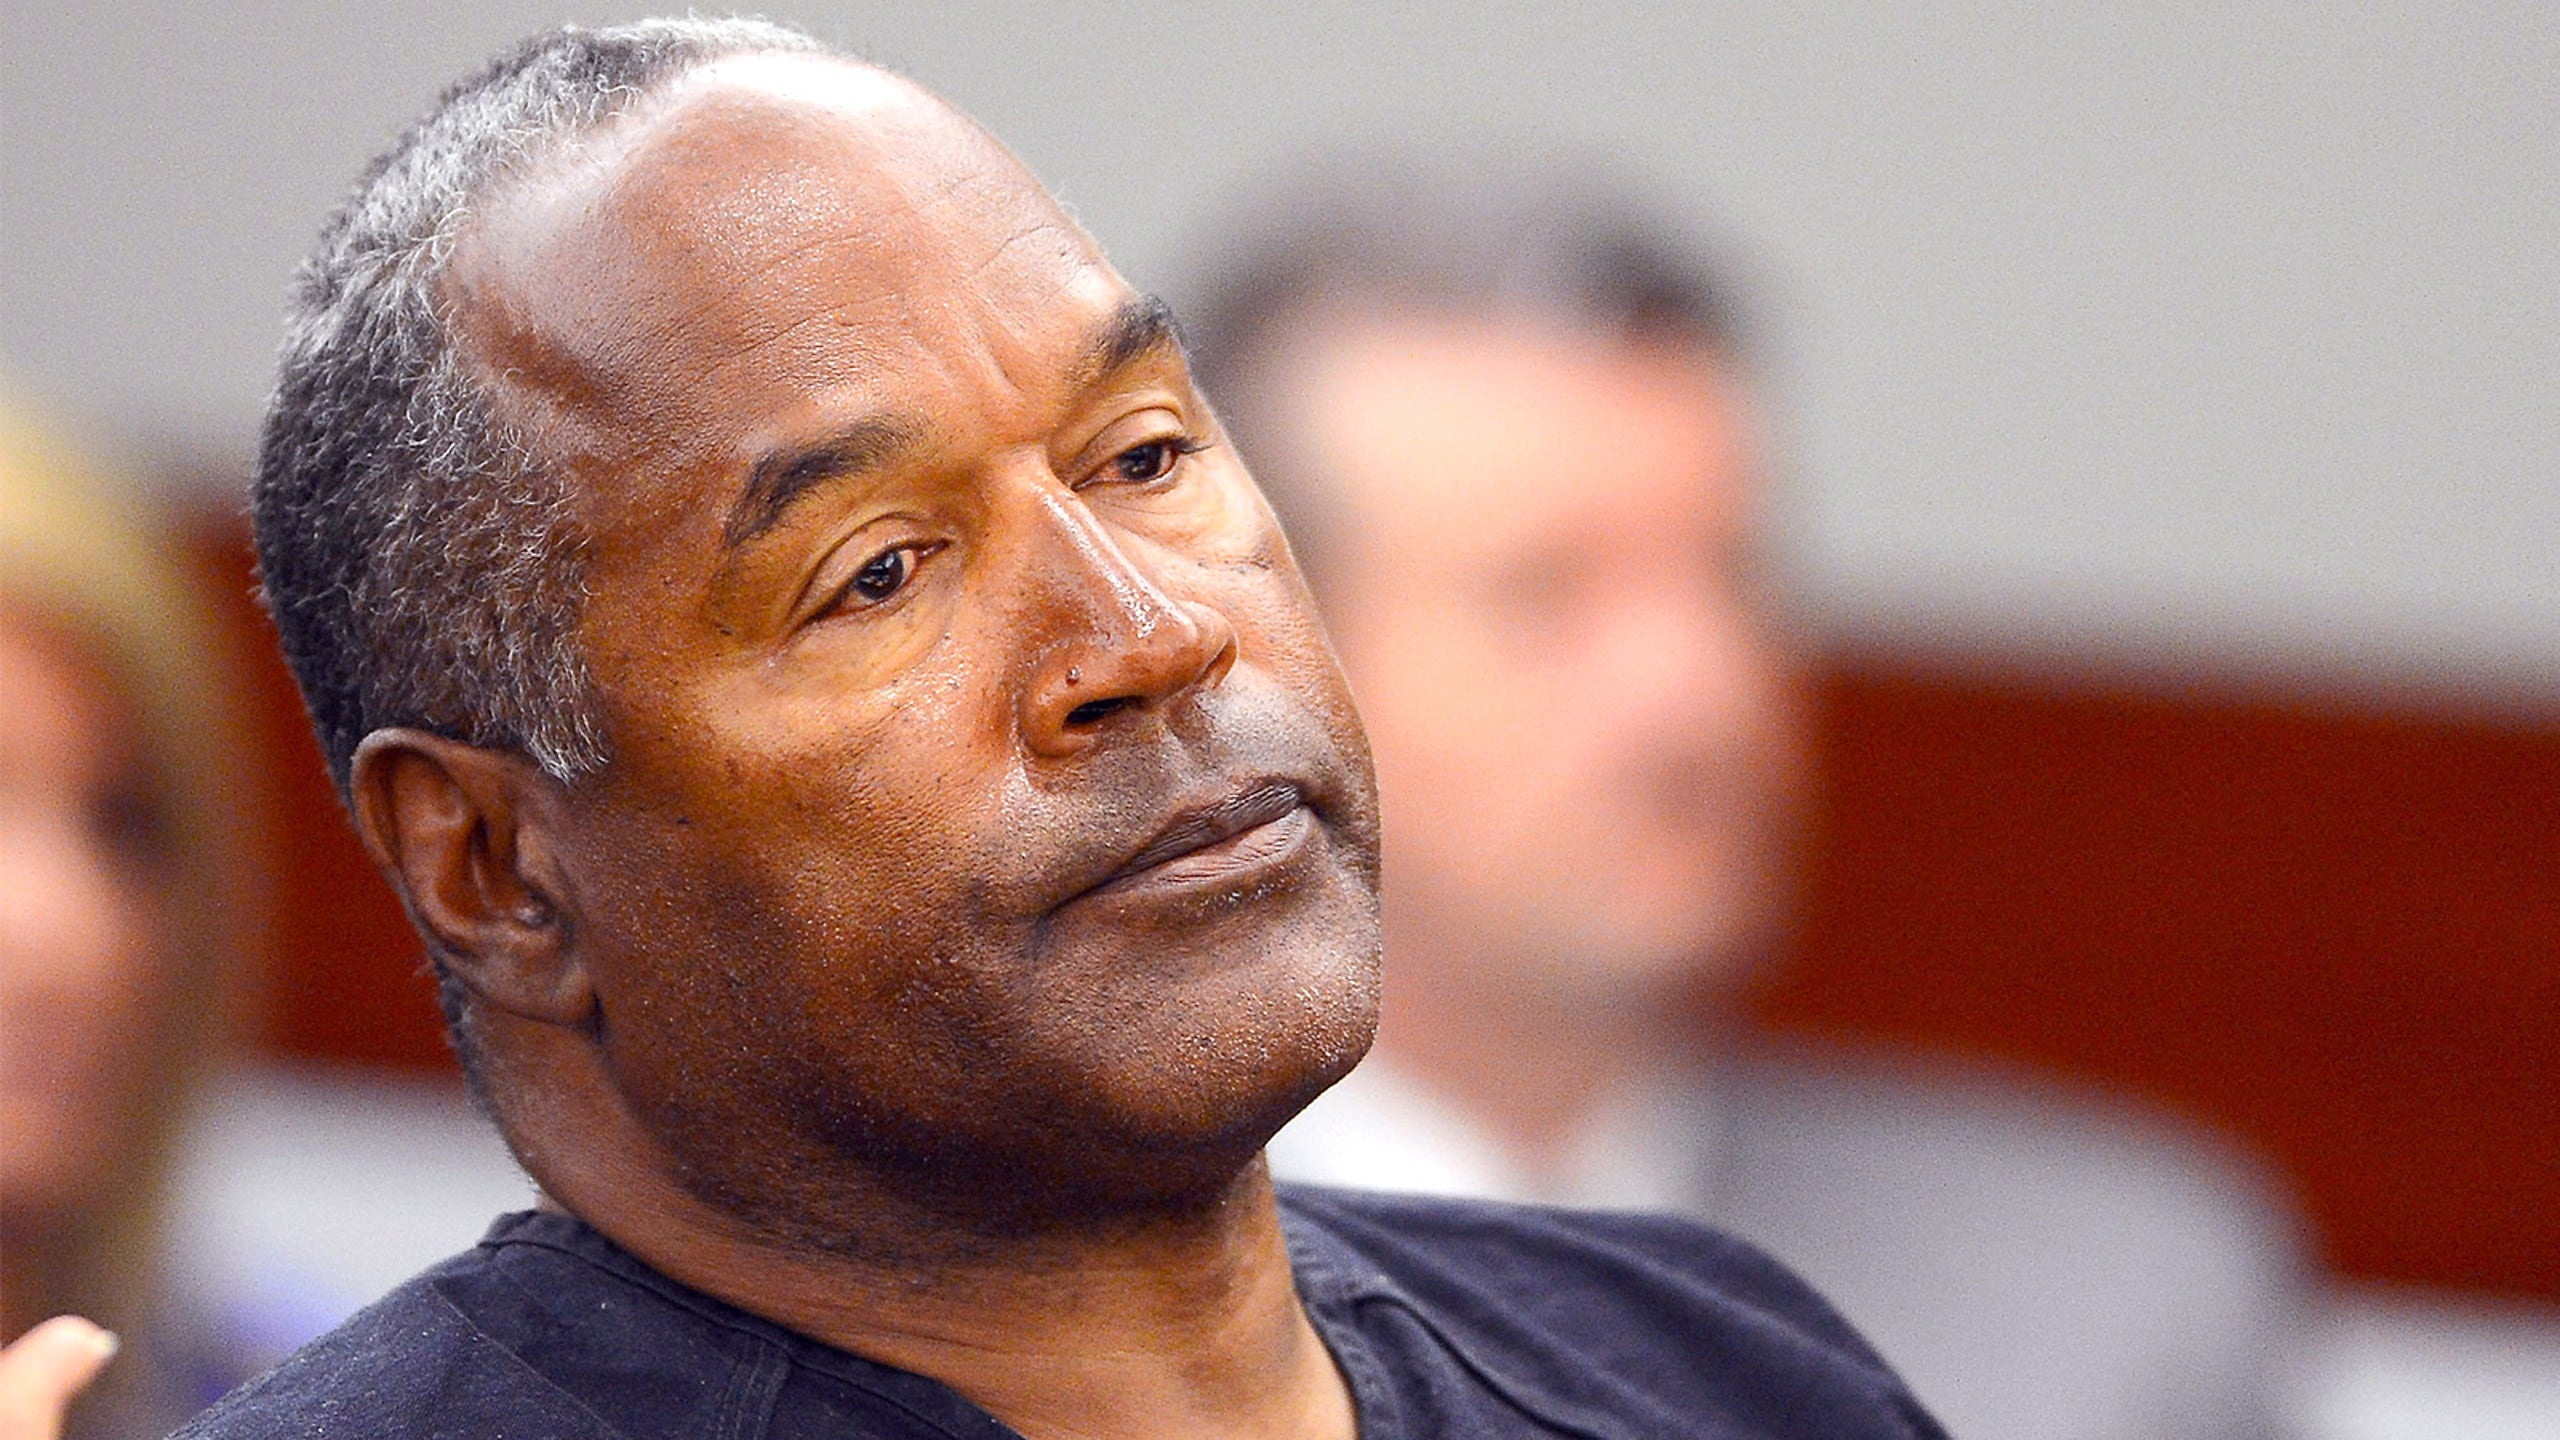 OJ Simpson likely suffers from CTE, says 'Concussion' doctor | FOX Sports